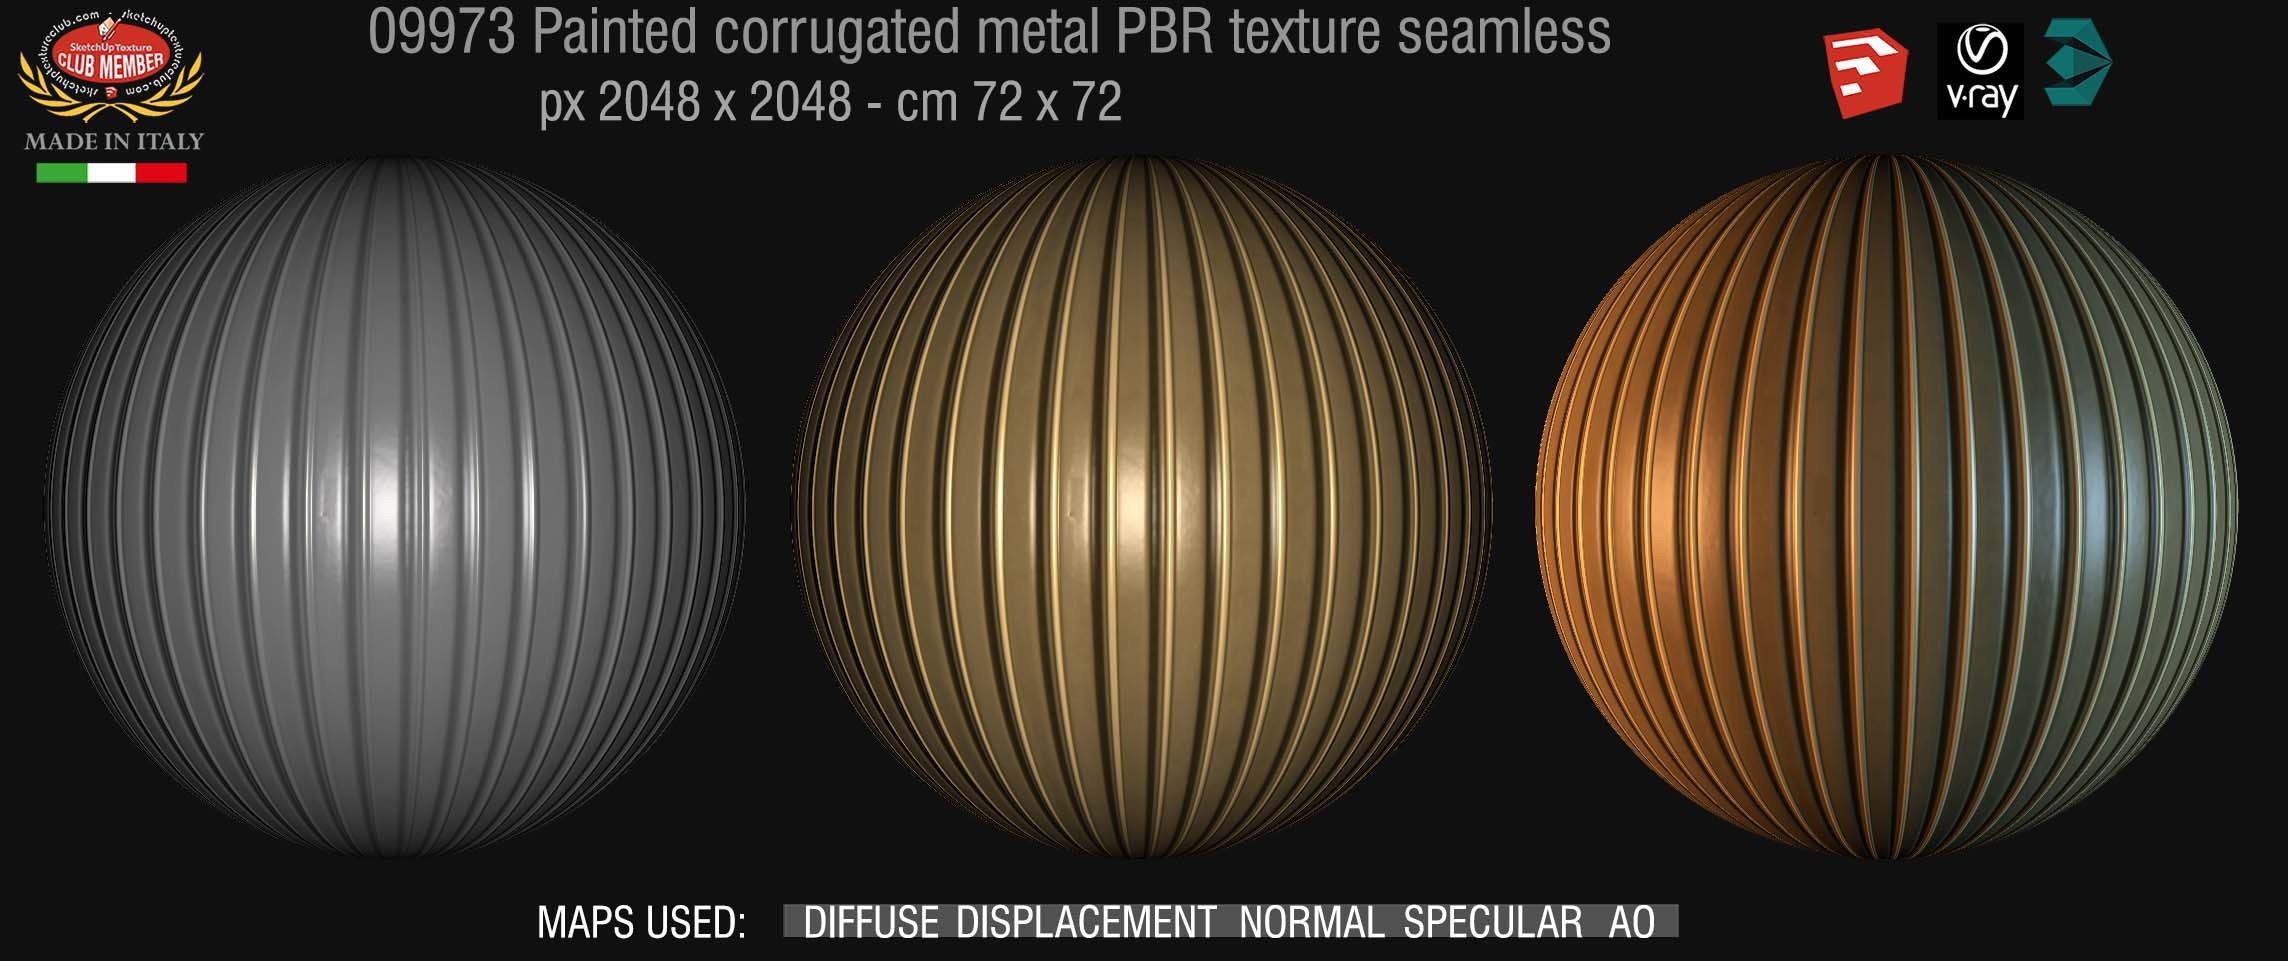 09973 Painted corrugated metal PBR texture seamless DEMO